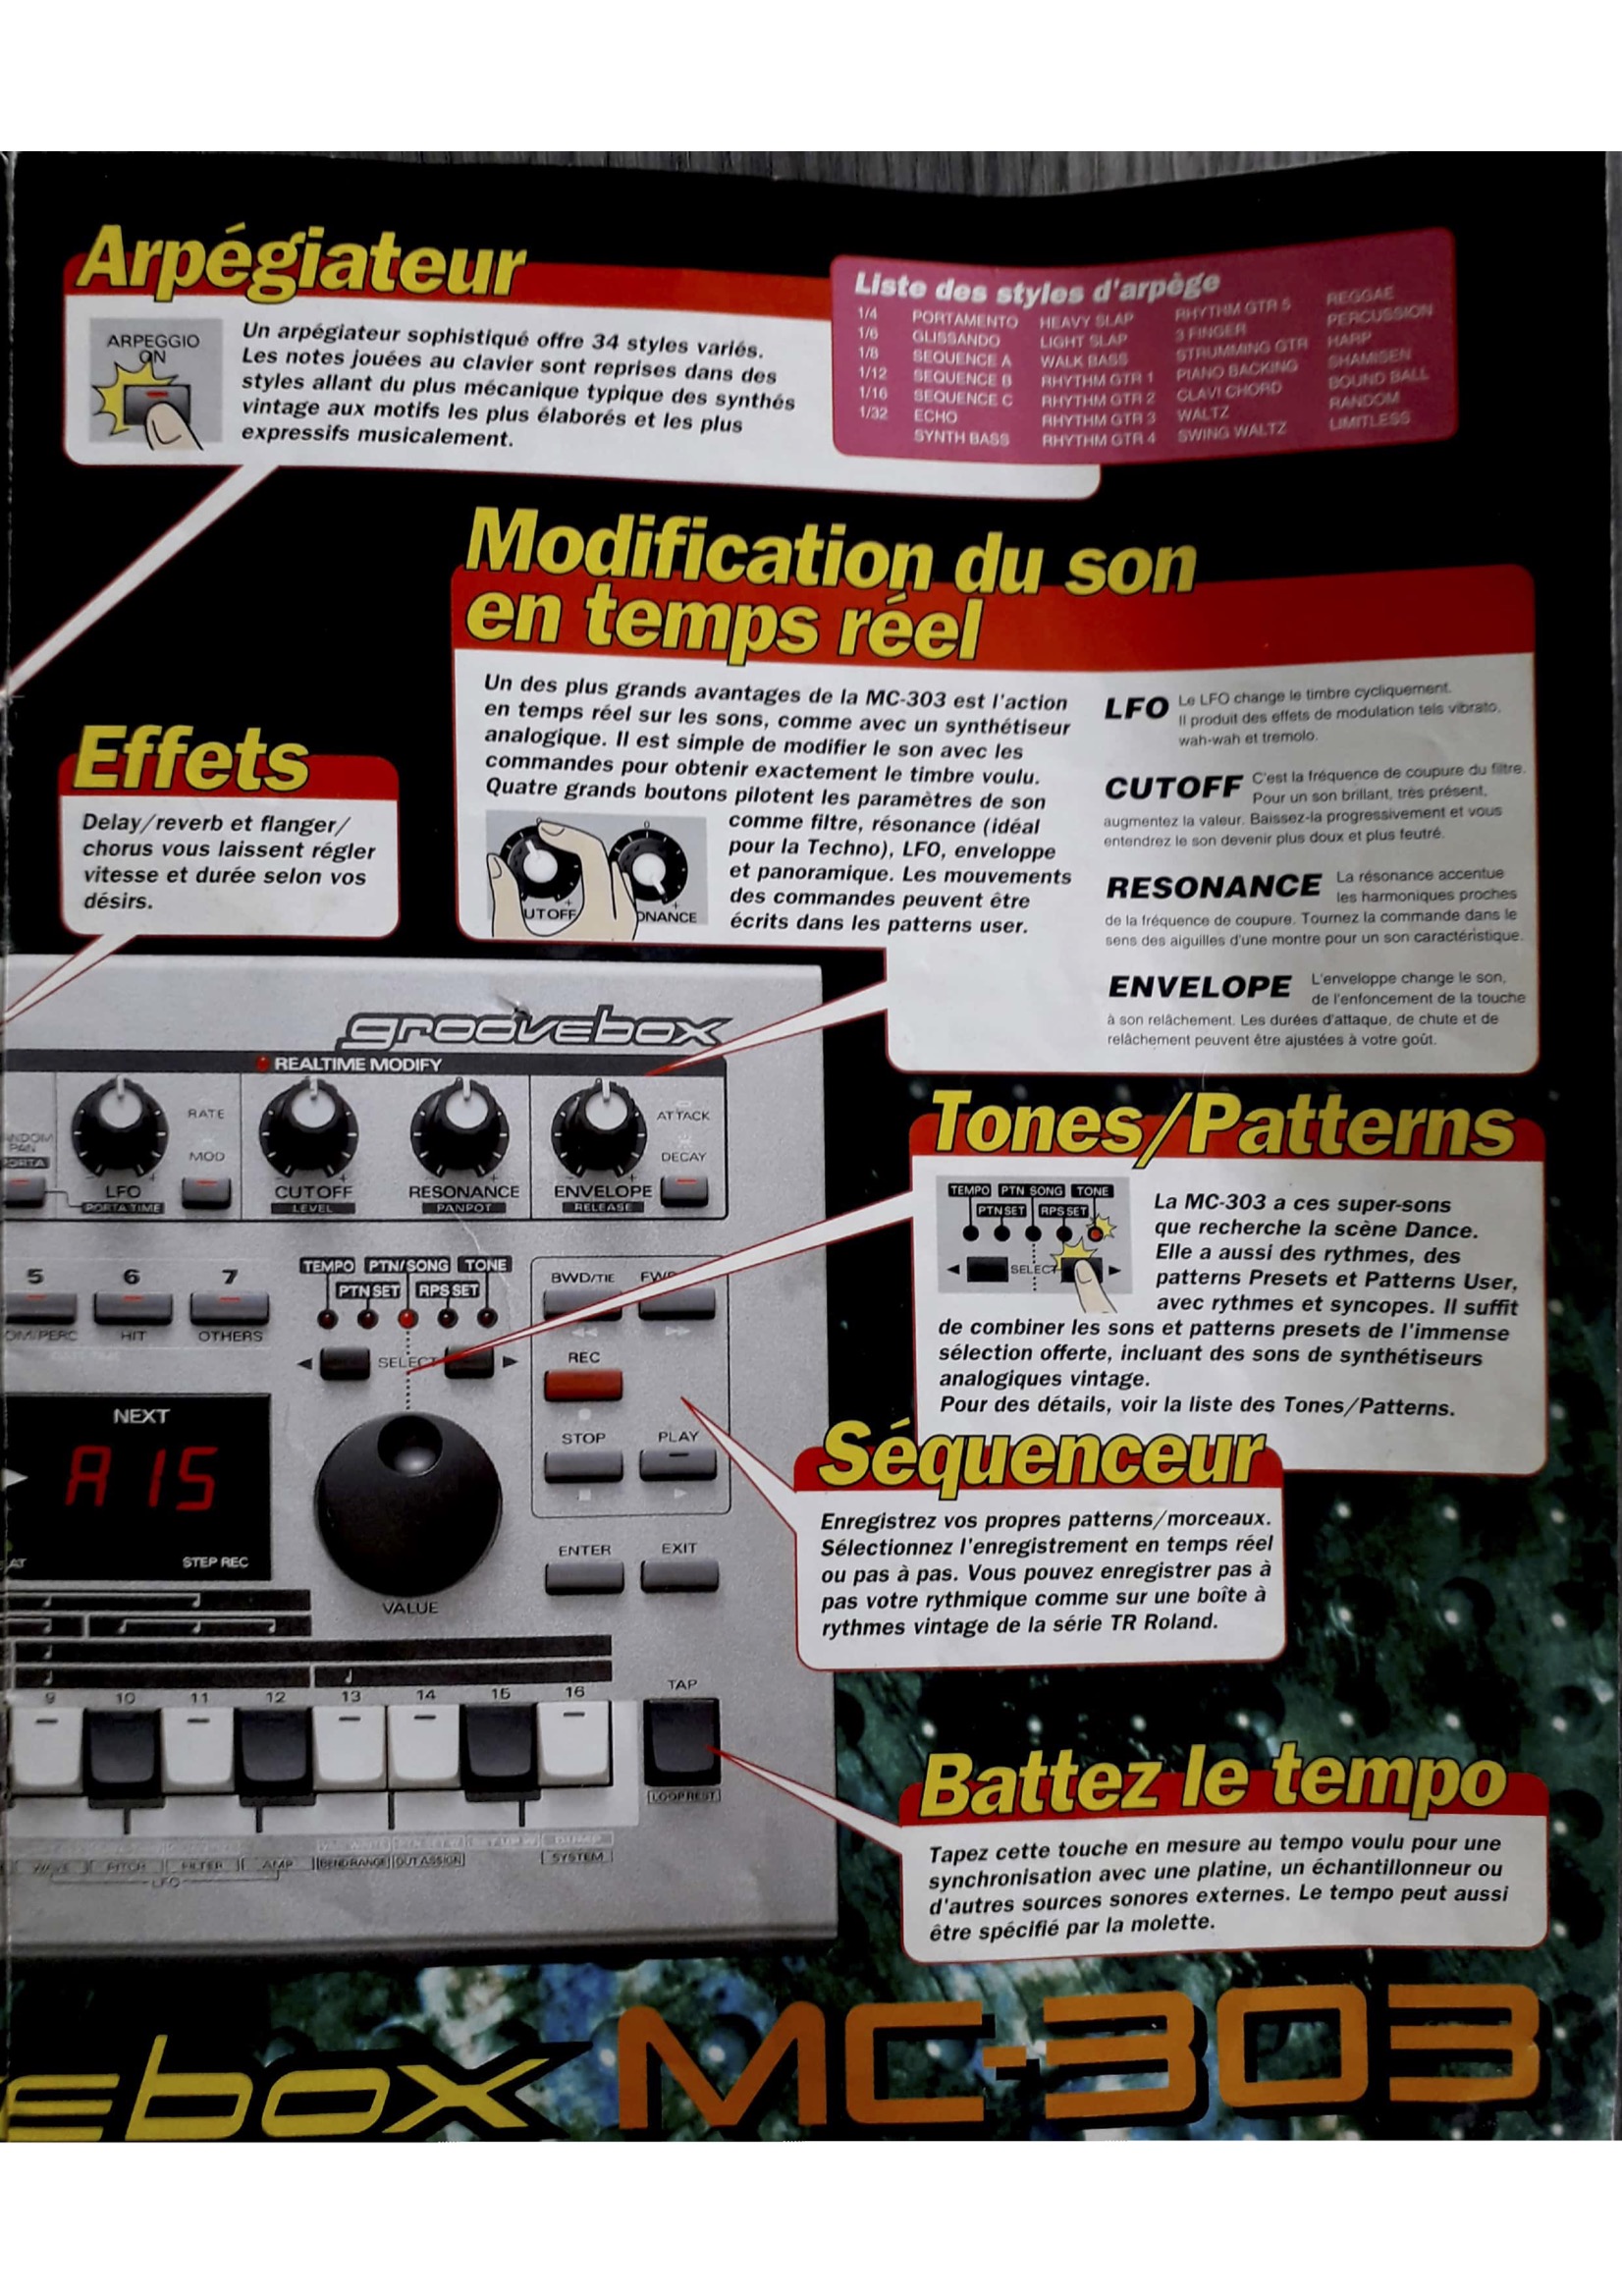 MATRIXSYNTH: French Roland Dance Gear Brochure Featuring the MC 